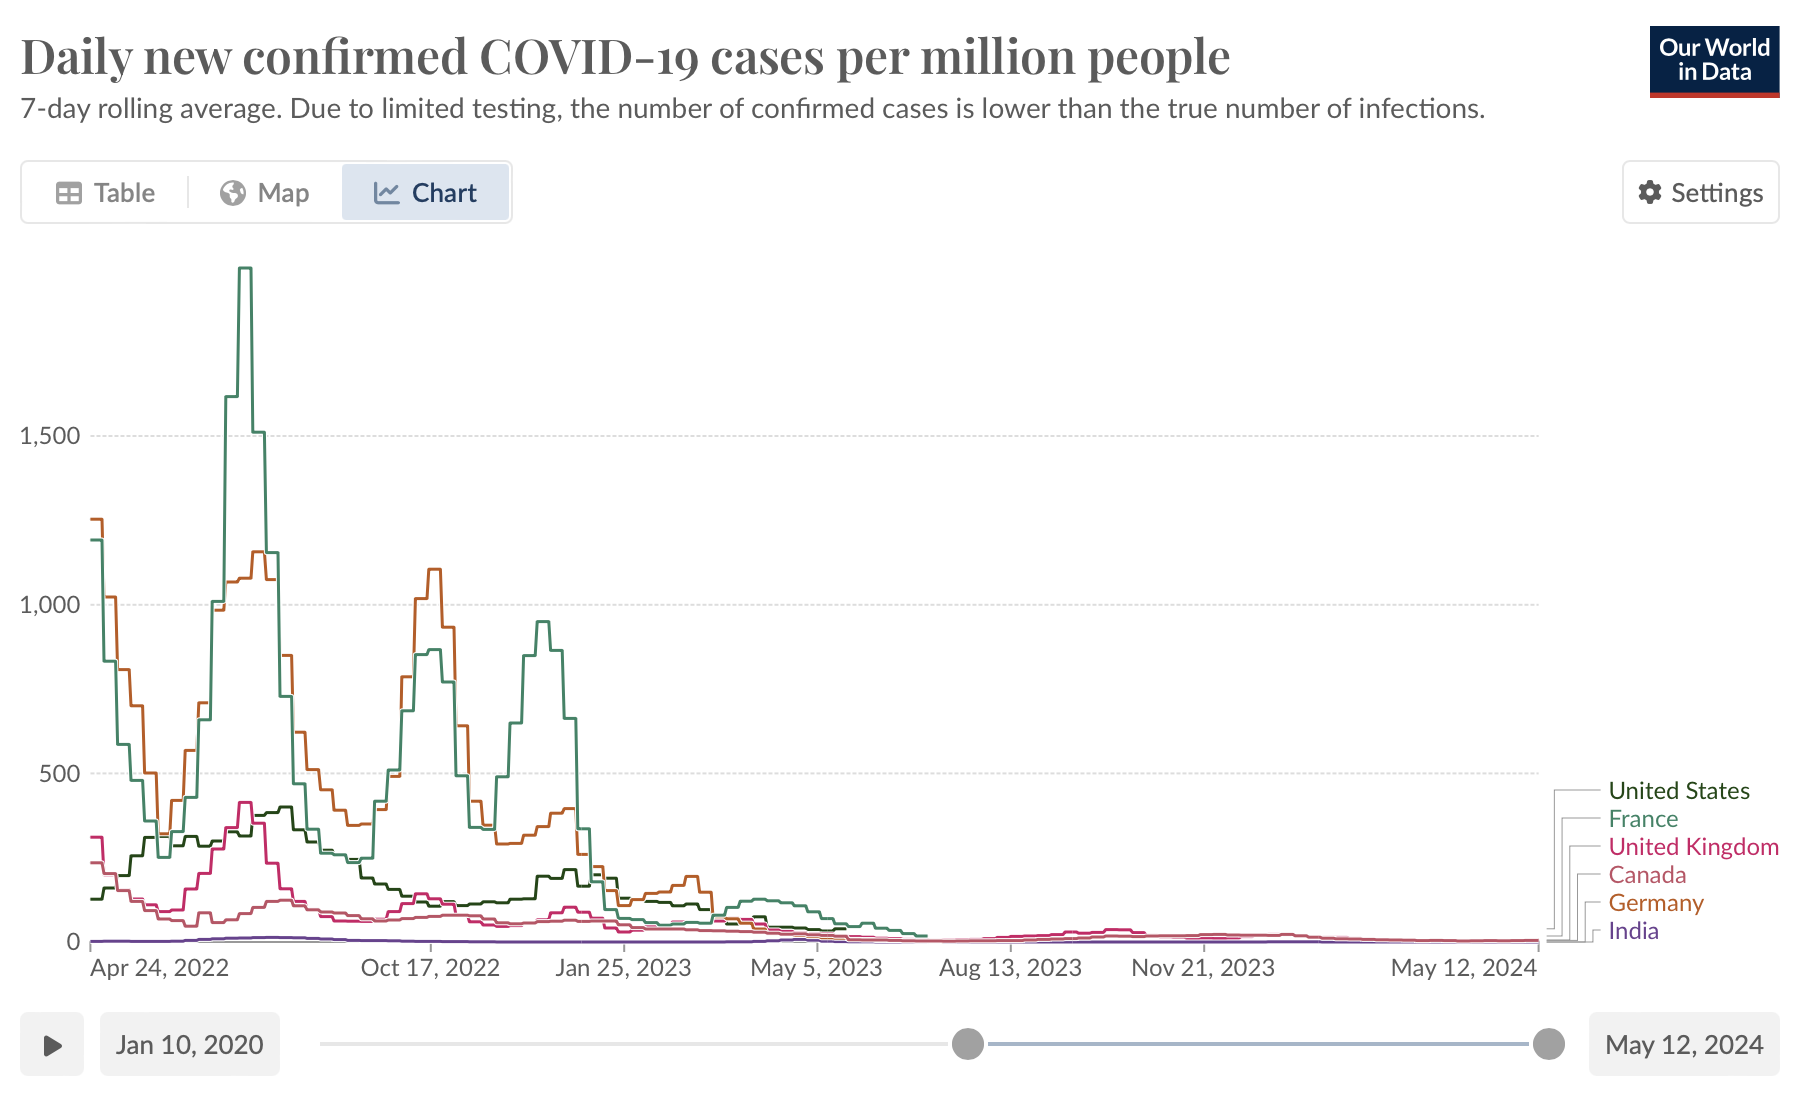 Line plot from OurWorldInData showing changes in the number of daily COVID-19 cases over time in the US, France, the UK, Canada, Germany, and India.